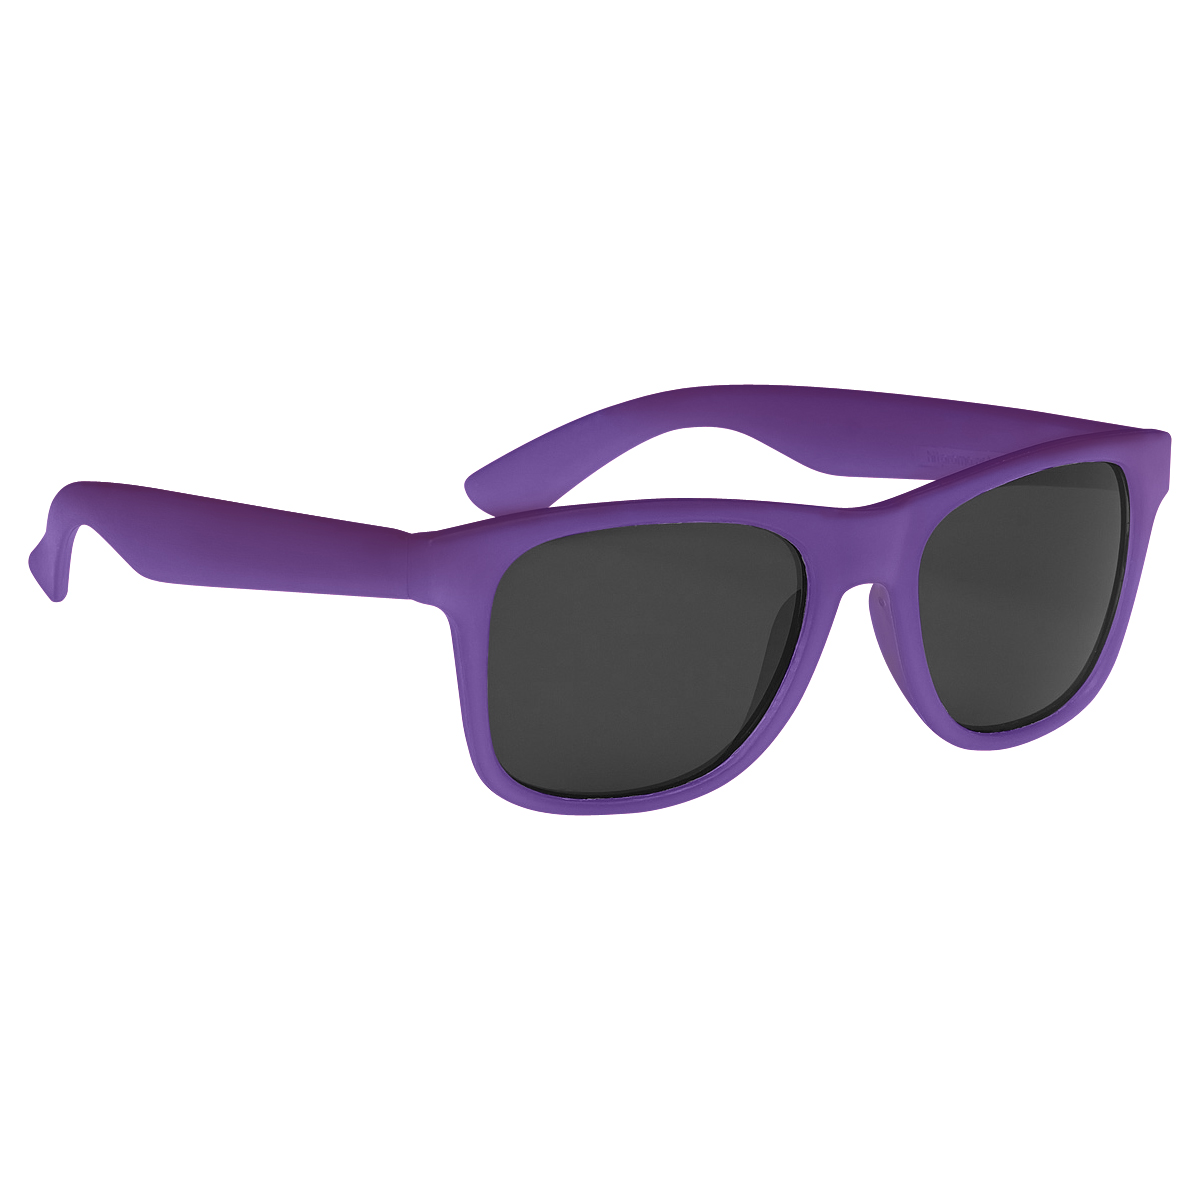 #6210 Color Changing Malibu Sunglasses - Hit Promotional Products